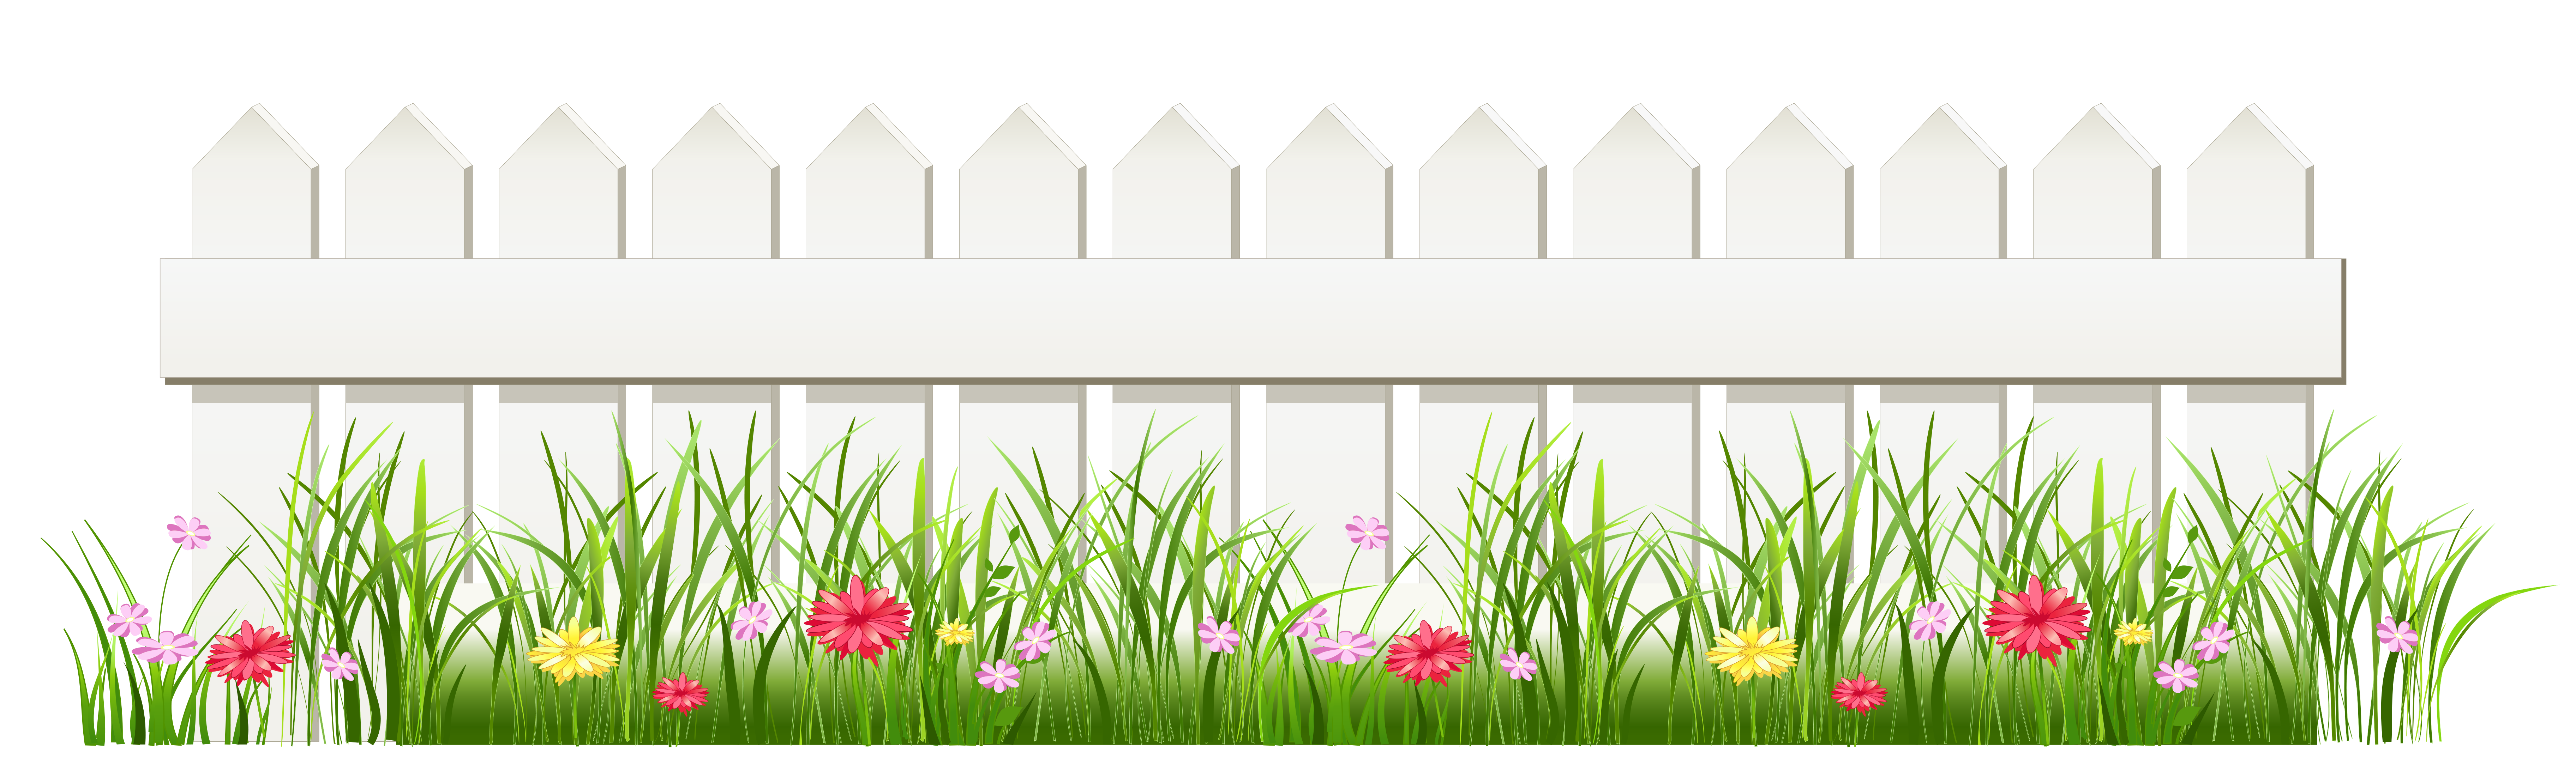 Divider clipart polka dot. Transparent white fence with